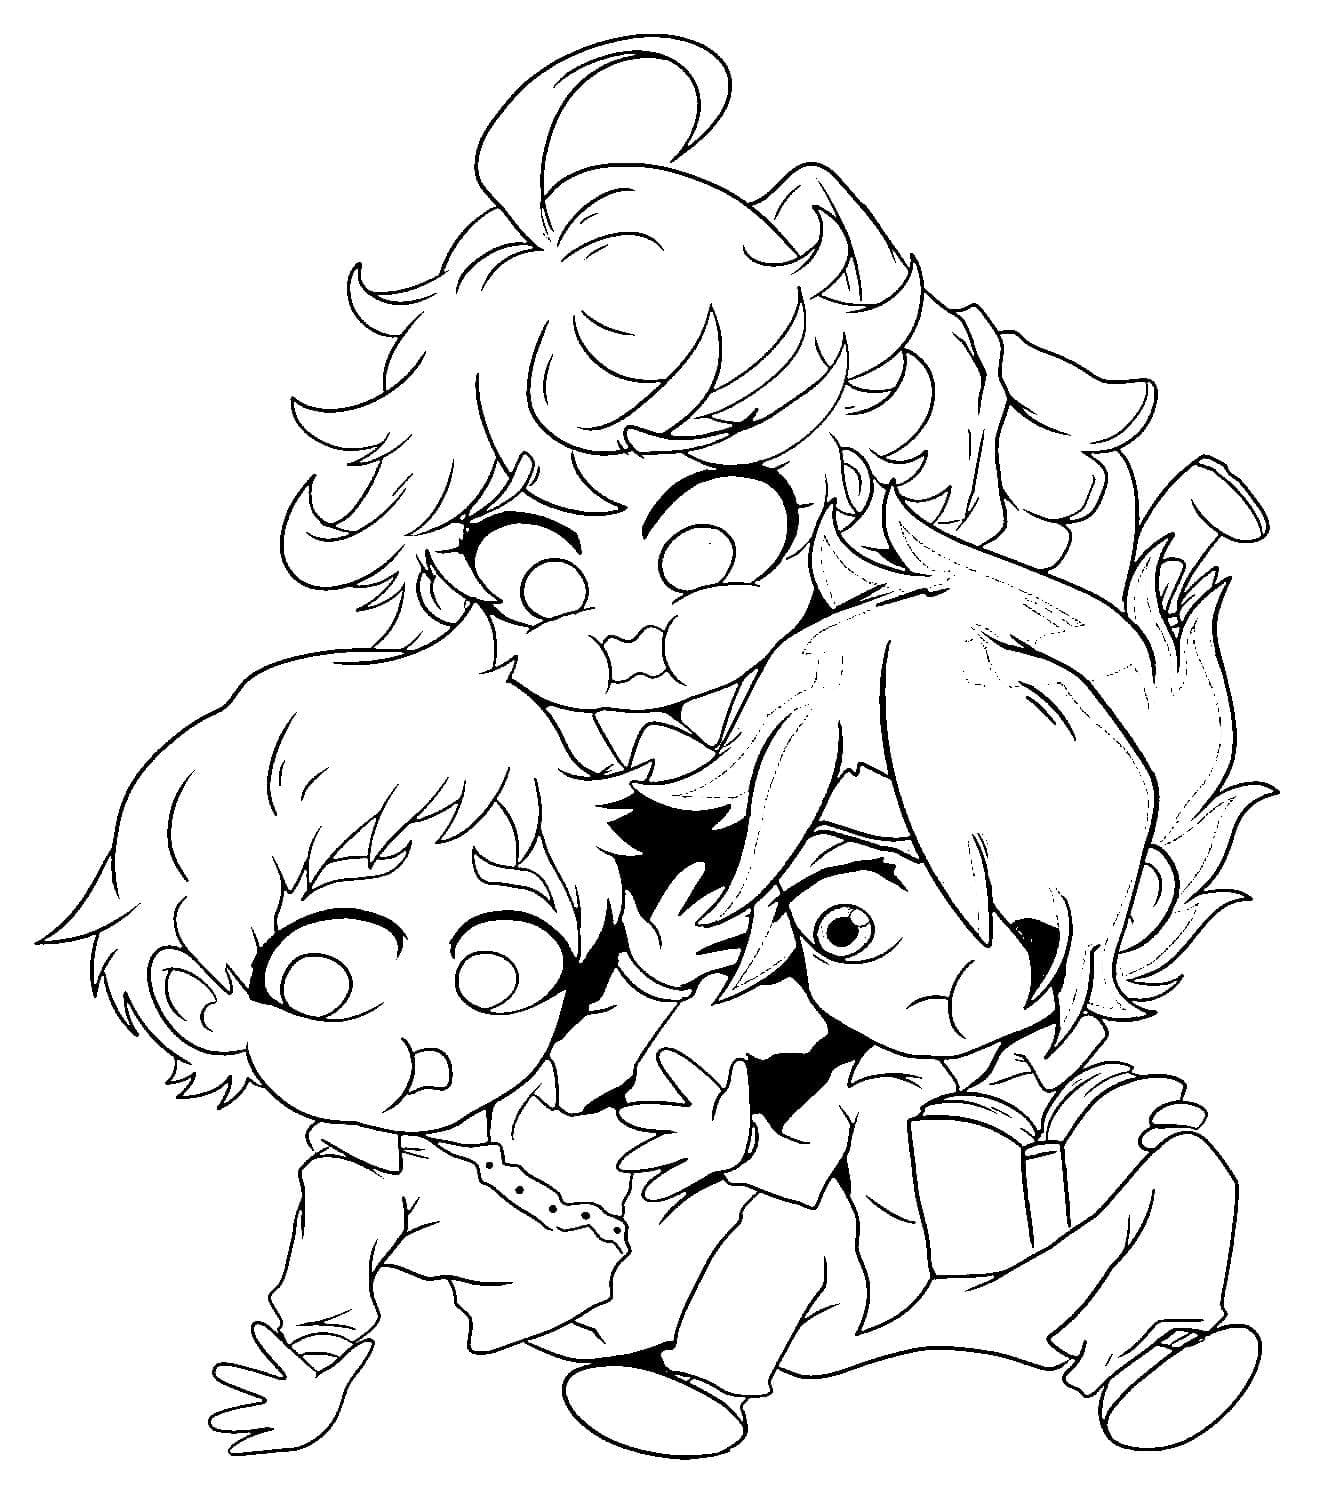 Adorable The Promised Neverland Coloring Page Free Printable Coloring